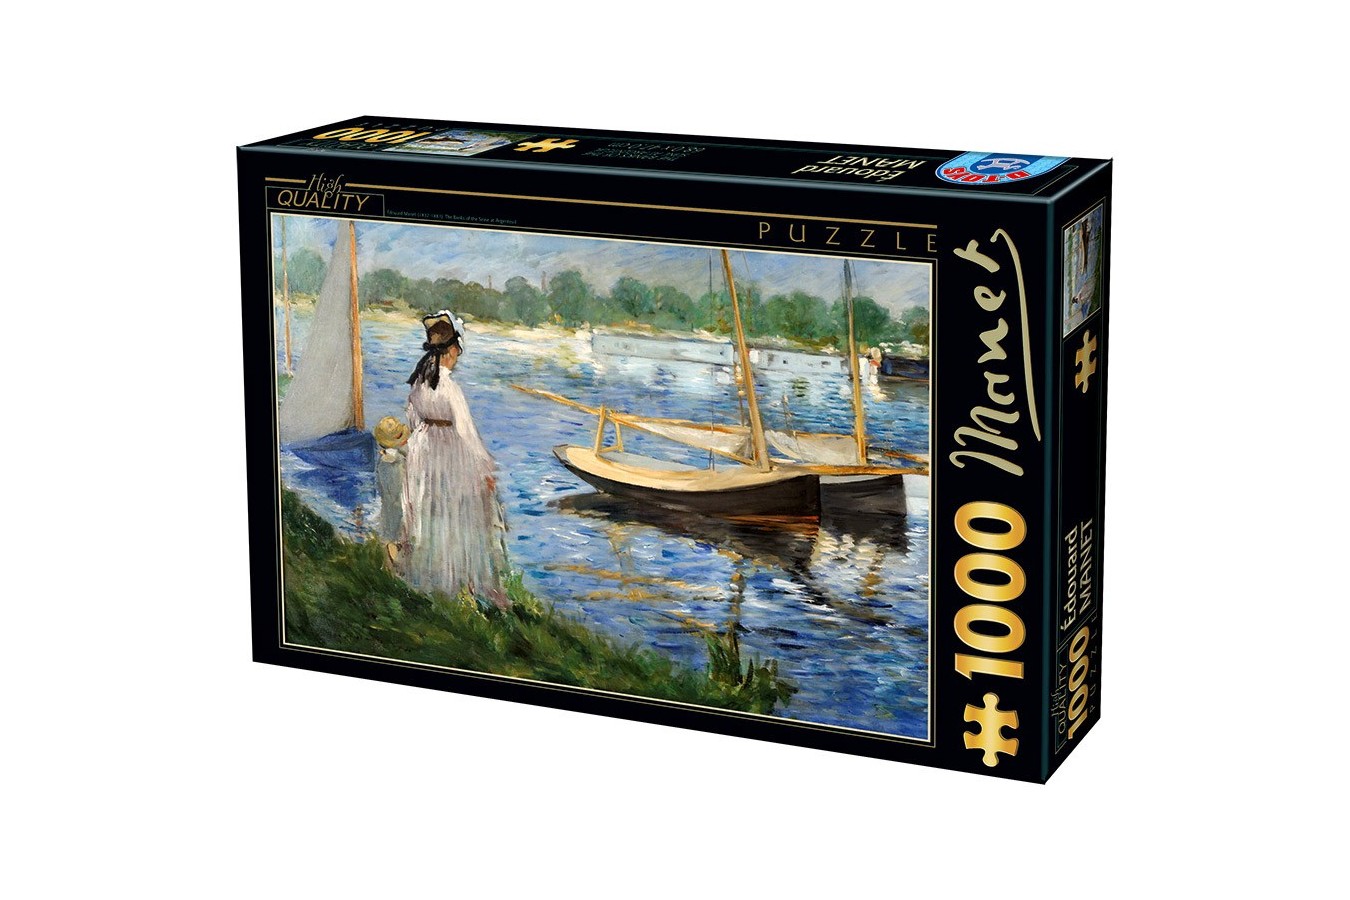 Puzzle D-Toys - Edouard Manet: Edouard The-Banks of the Seine at Argenteuil, 1.000 piese (Dtoys-73068-MA05-(74522))